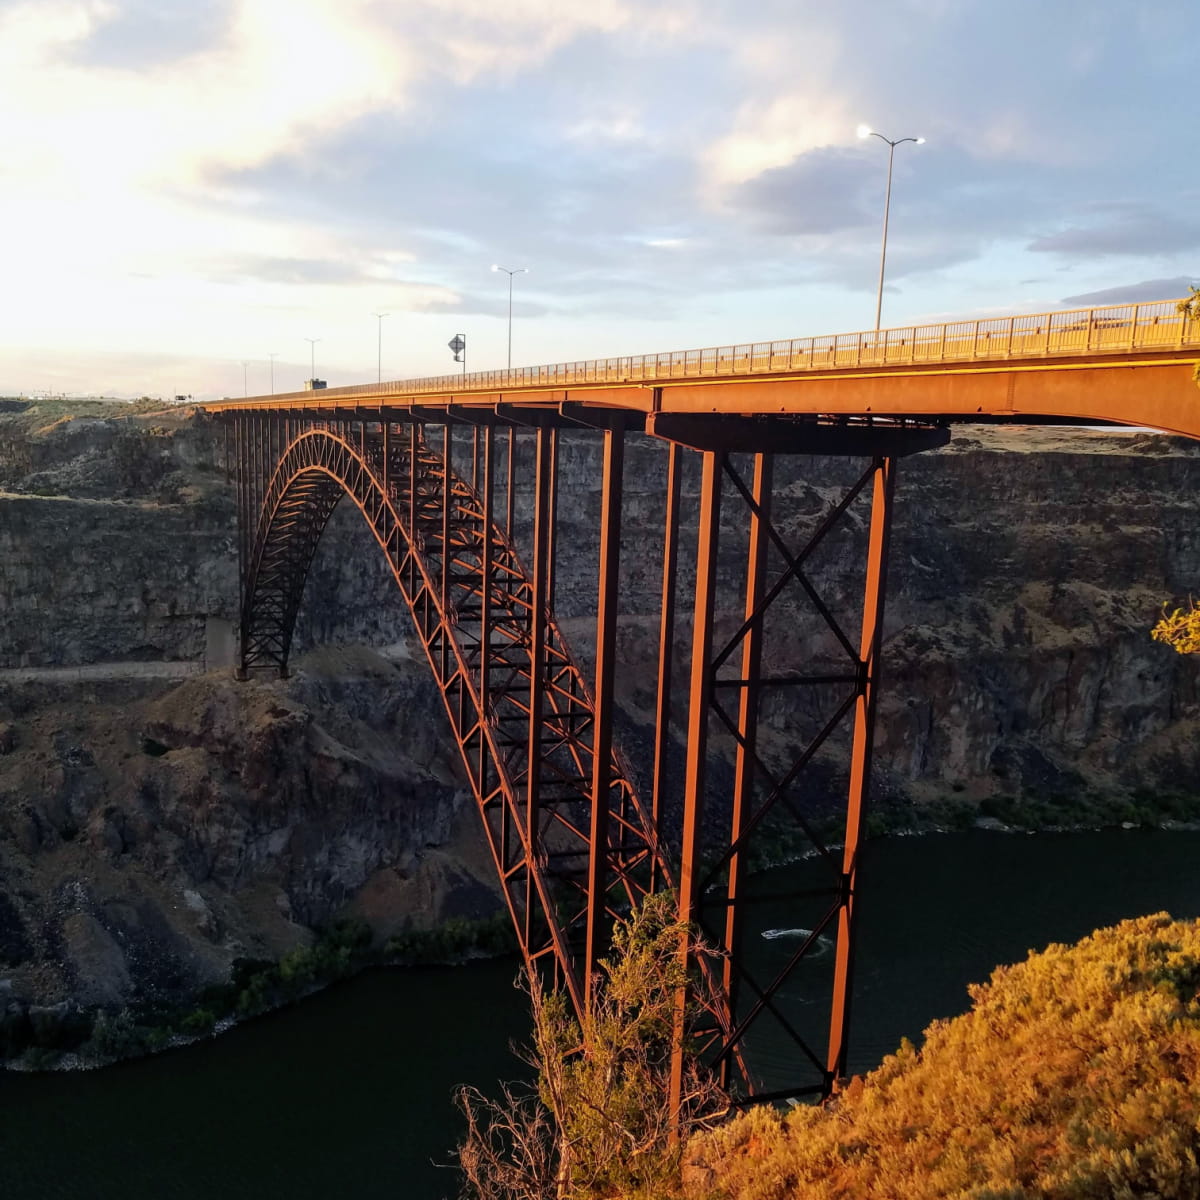 Arched bridge spanning a large canyon, metalwork reflecting in sunset.